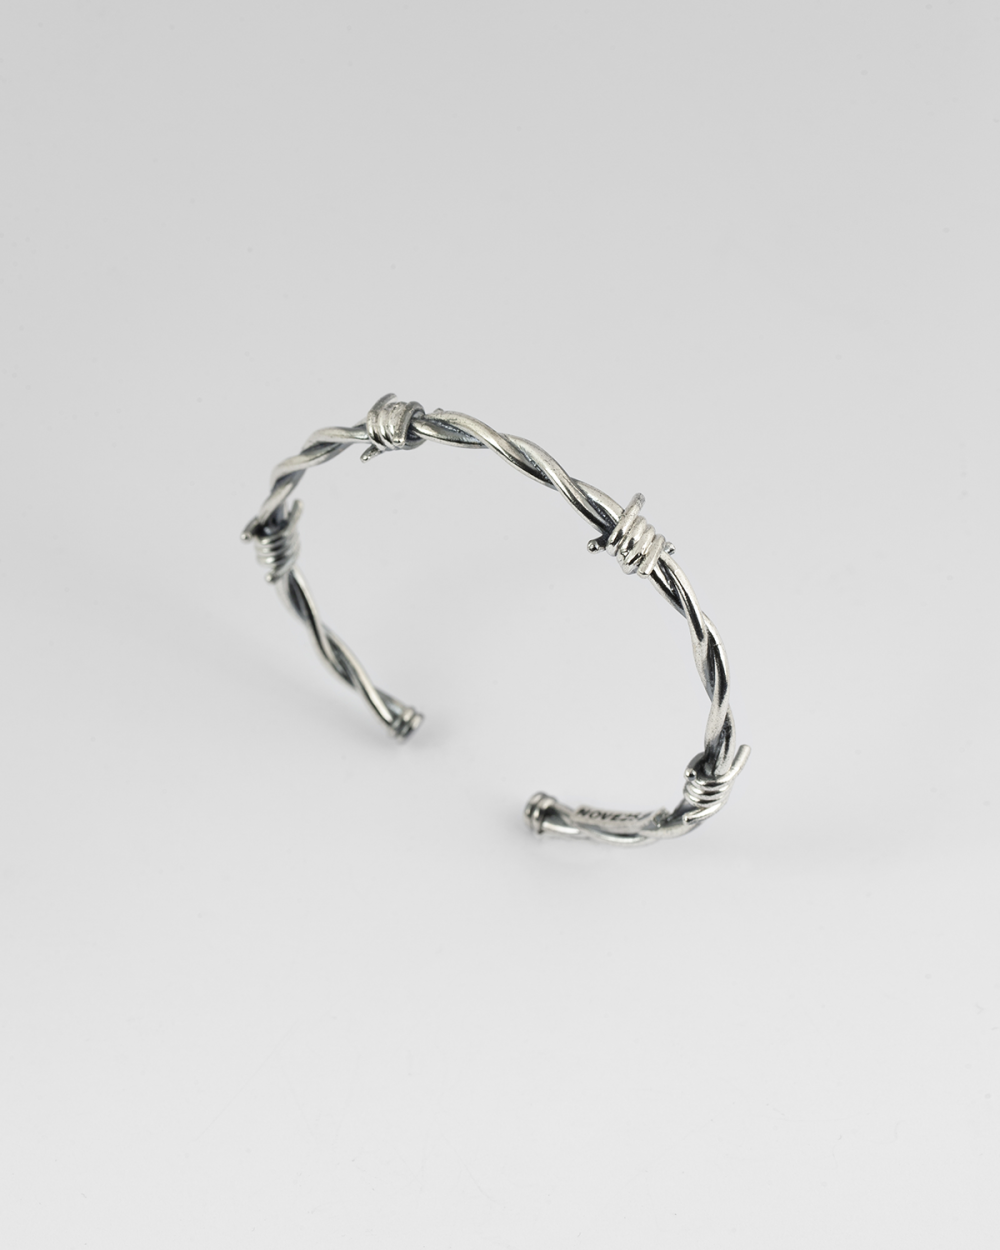 BARBED WIRE BANGLE